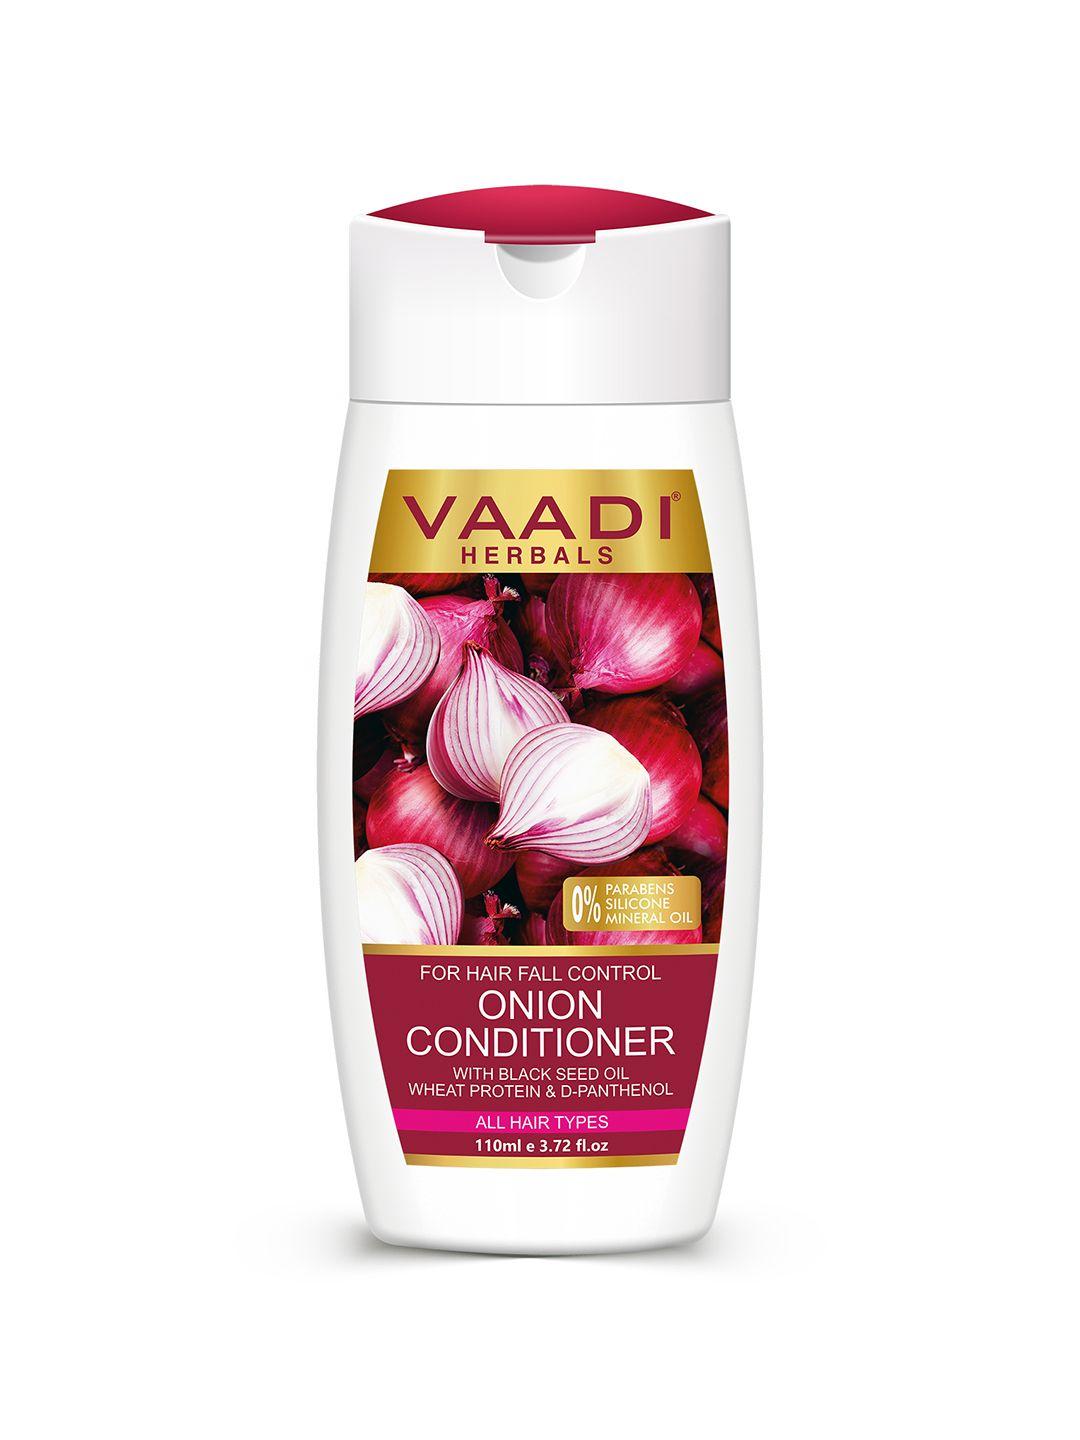 vaadi herbals onion conditioner for hair fall control with wheat protein - 110ml